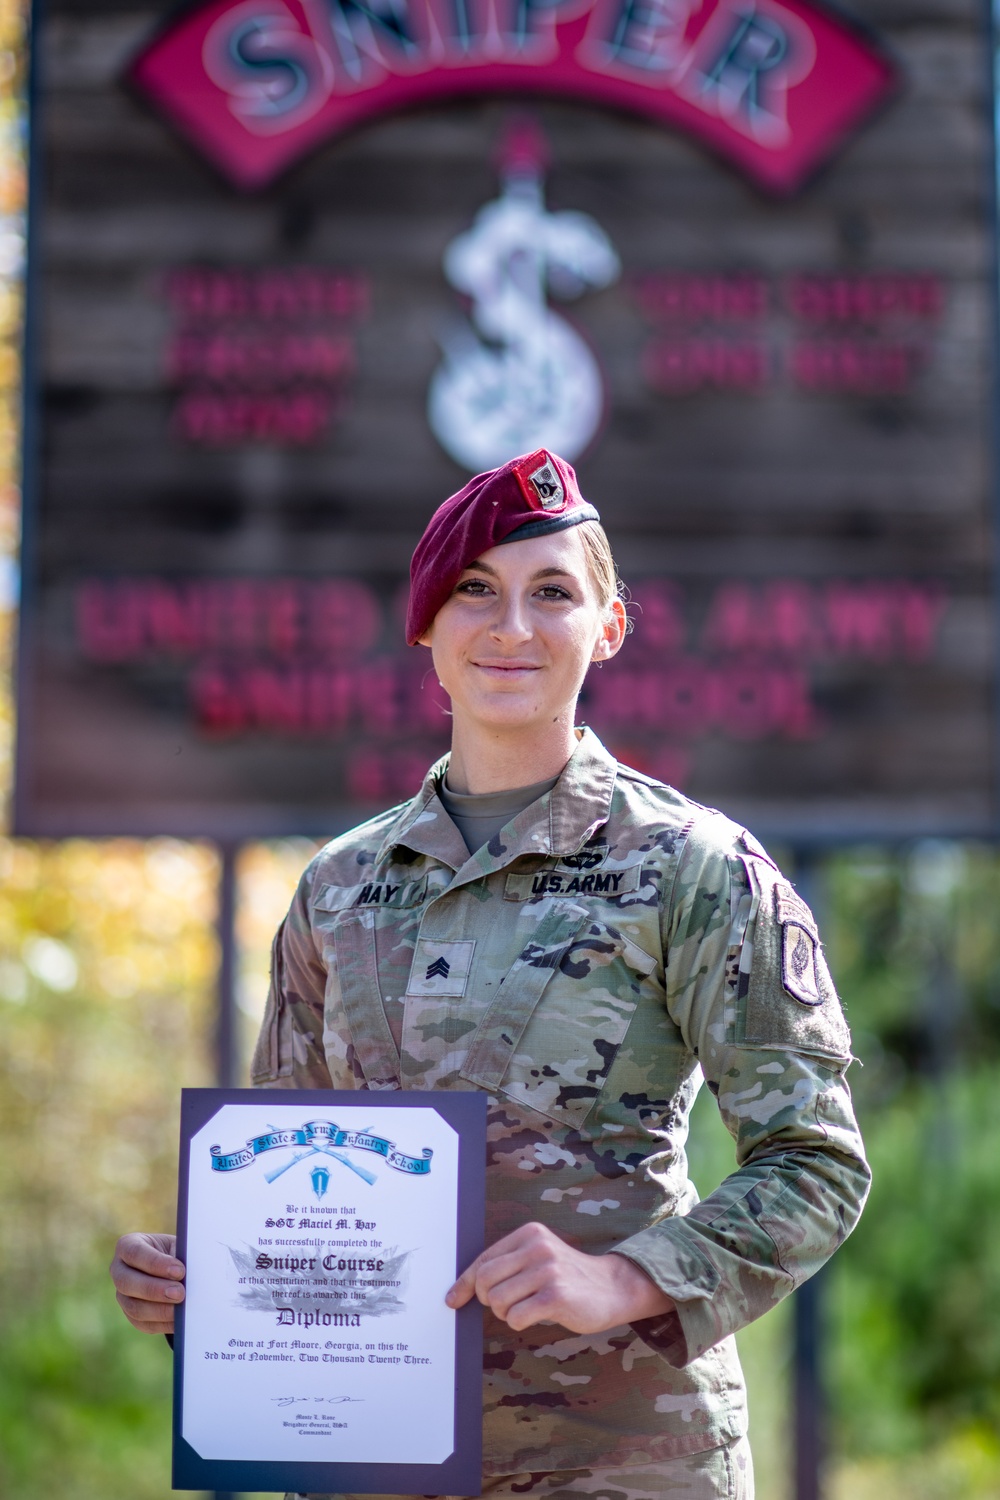 Sky Soldier makes history as first active duty female Army sniper